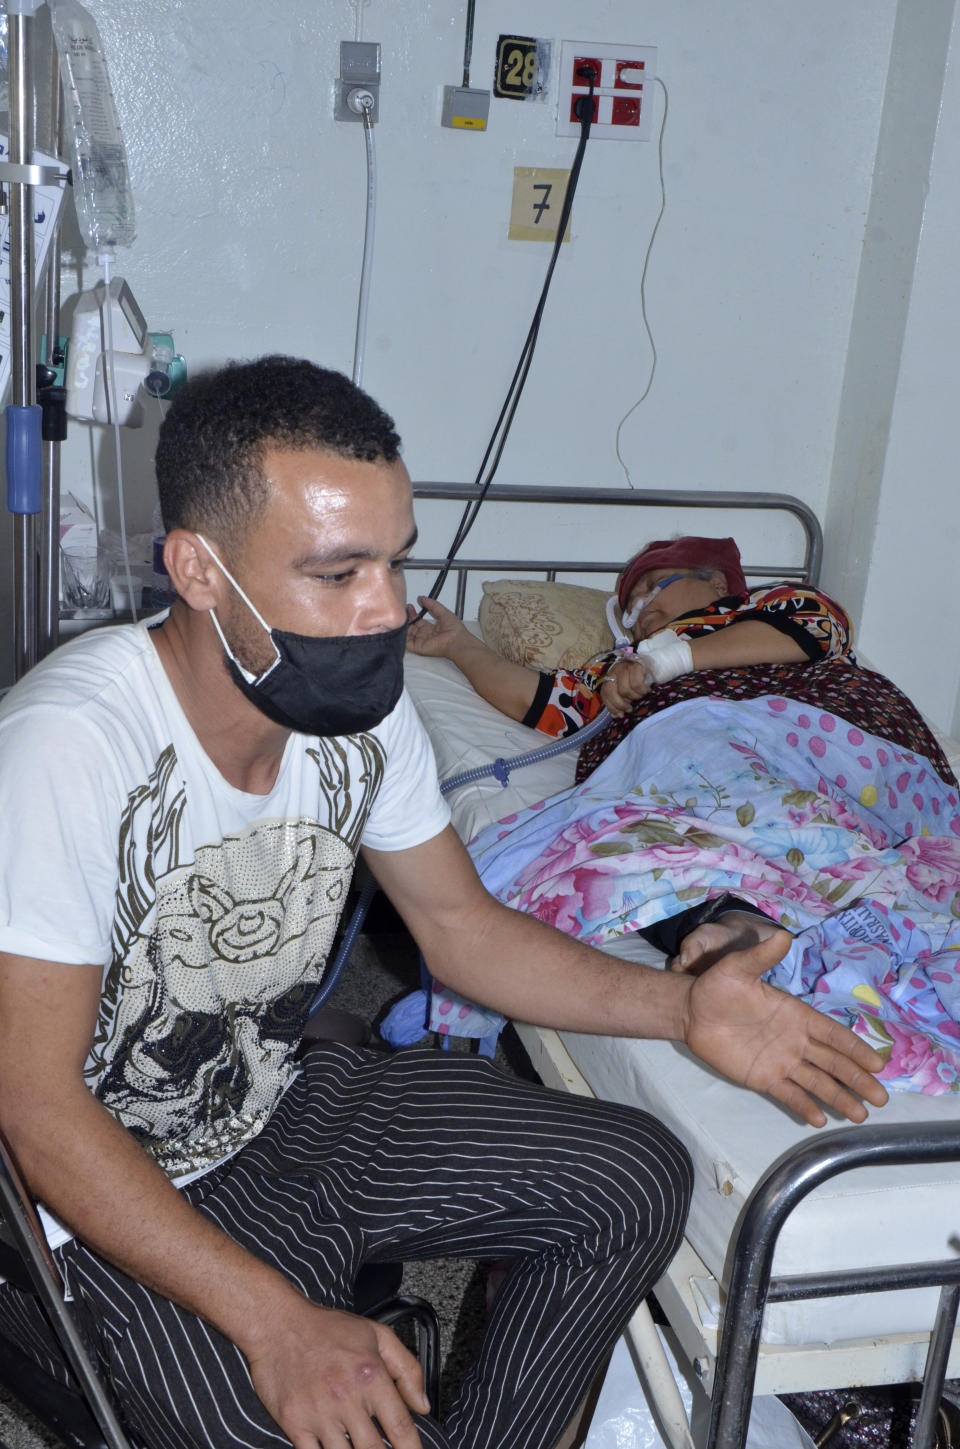 A man sits by a relative infected with the COVID-19 virus in the Iben El Jazzar hospital in Kairouan, Tunisia, Monday, June 28, 2021.Confirmed virus infections in Tunisia have grown sharply over the last month to the highest daily levels since the pandemic began, while the vaccination rate remains low, according to data from John's Hopkins University. The data indicate that Tunisia has reported Africa's highest per-capita death toll from the pandemic, and is currently recording one of the highest per-capita infection rates in Africa. (Photo/Aimen Othmani)